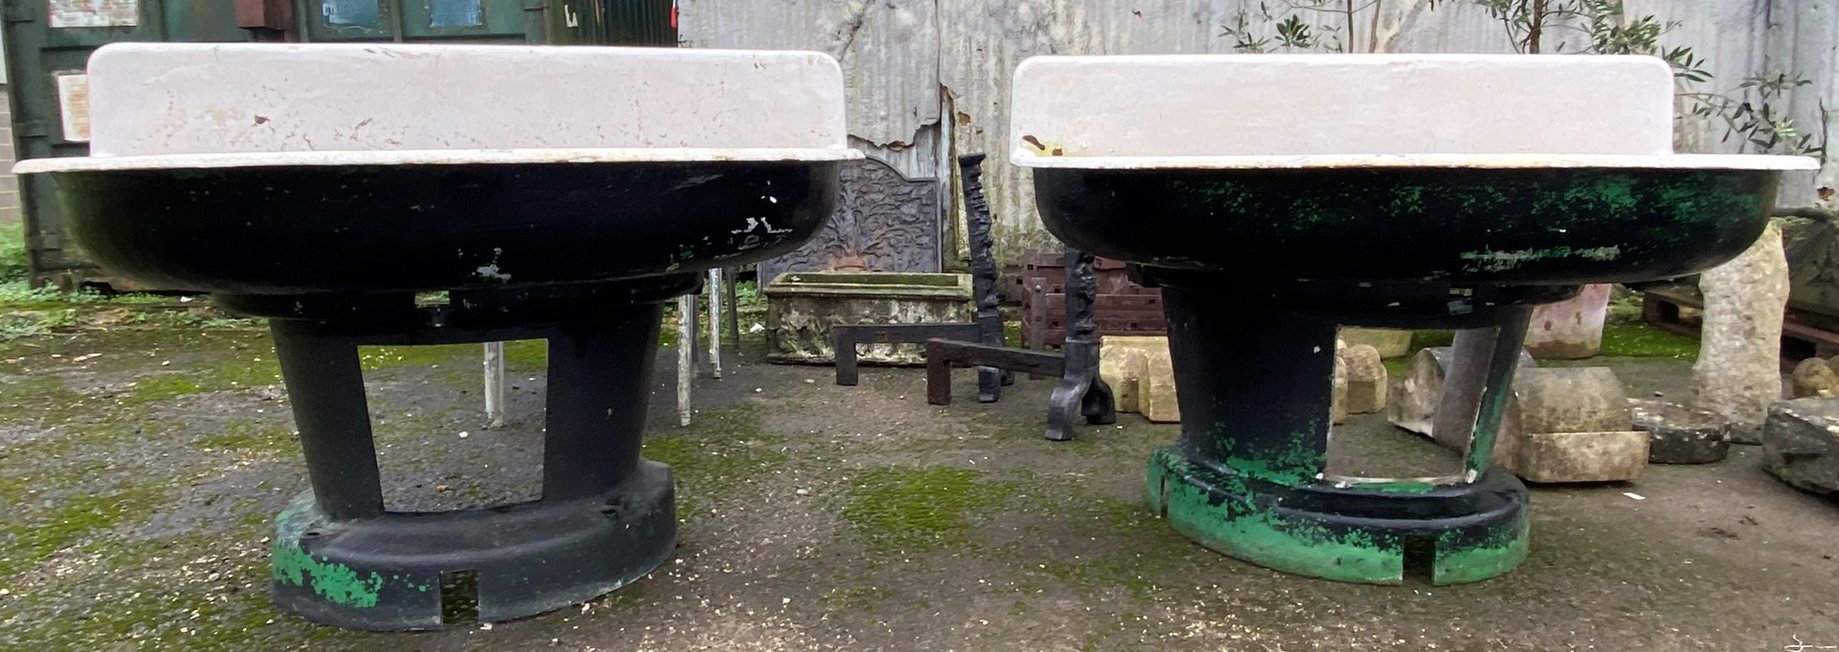 Quite remarkable pair of large enamelled feeders or troughs or sinks, d-end form on tapered bases, - Image 4 of 4